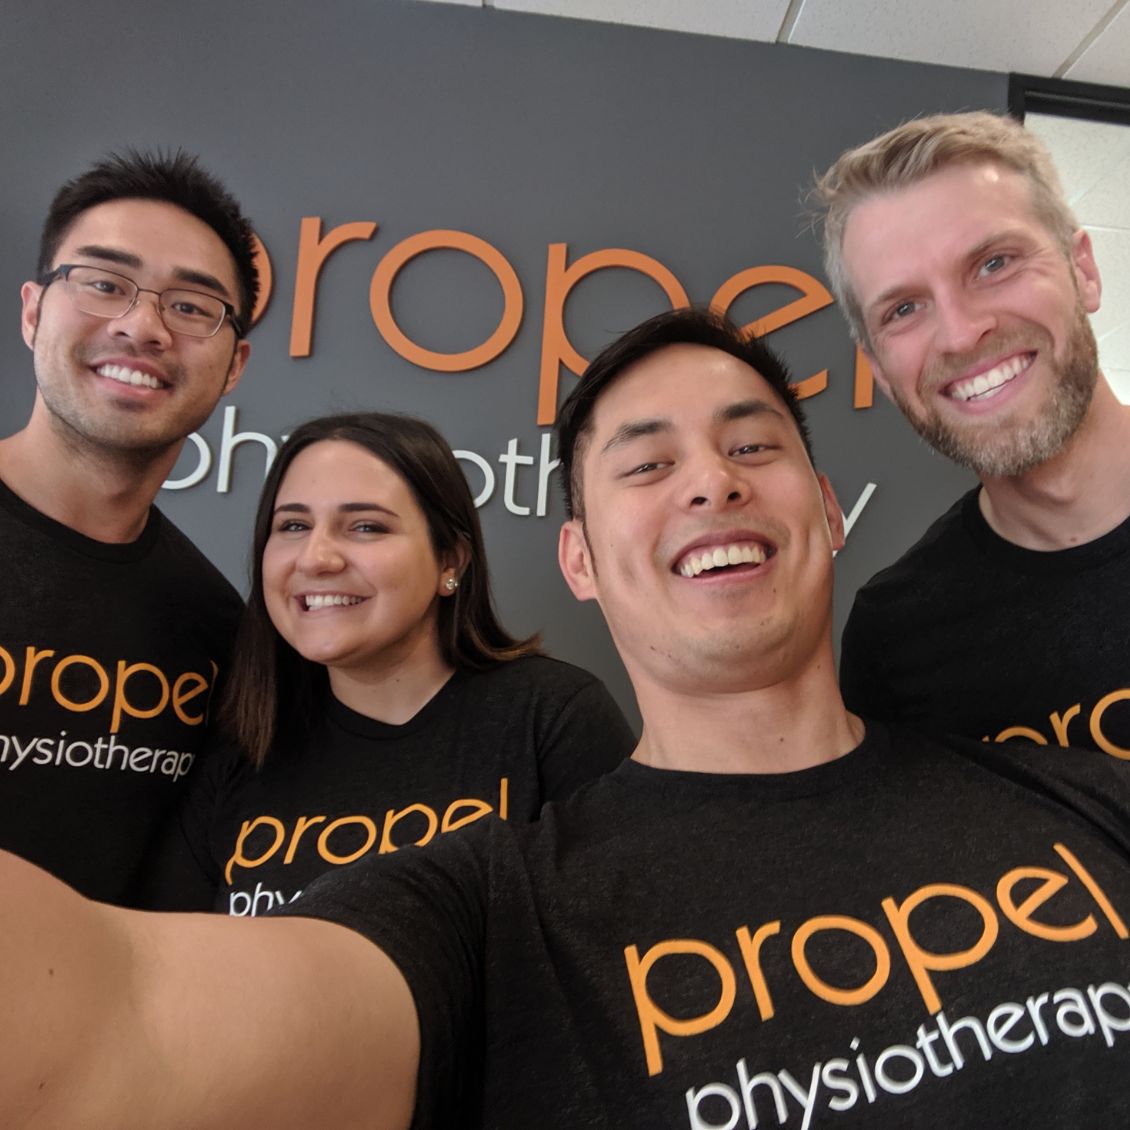 Propel Physiotherapy clinic staff